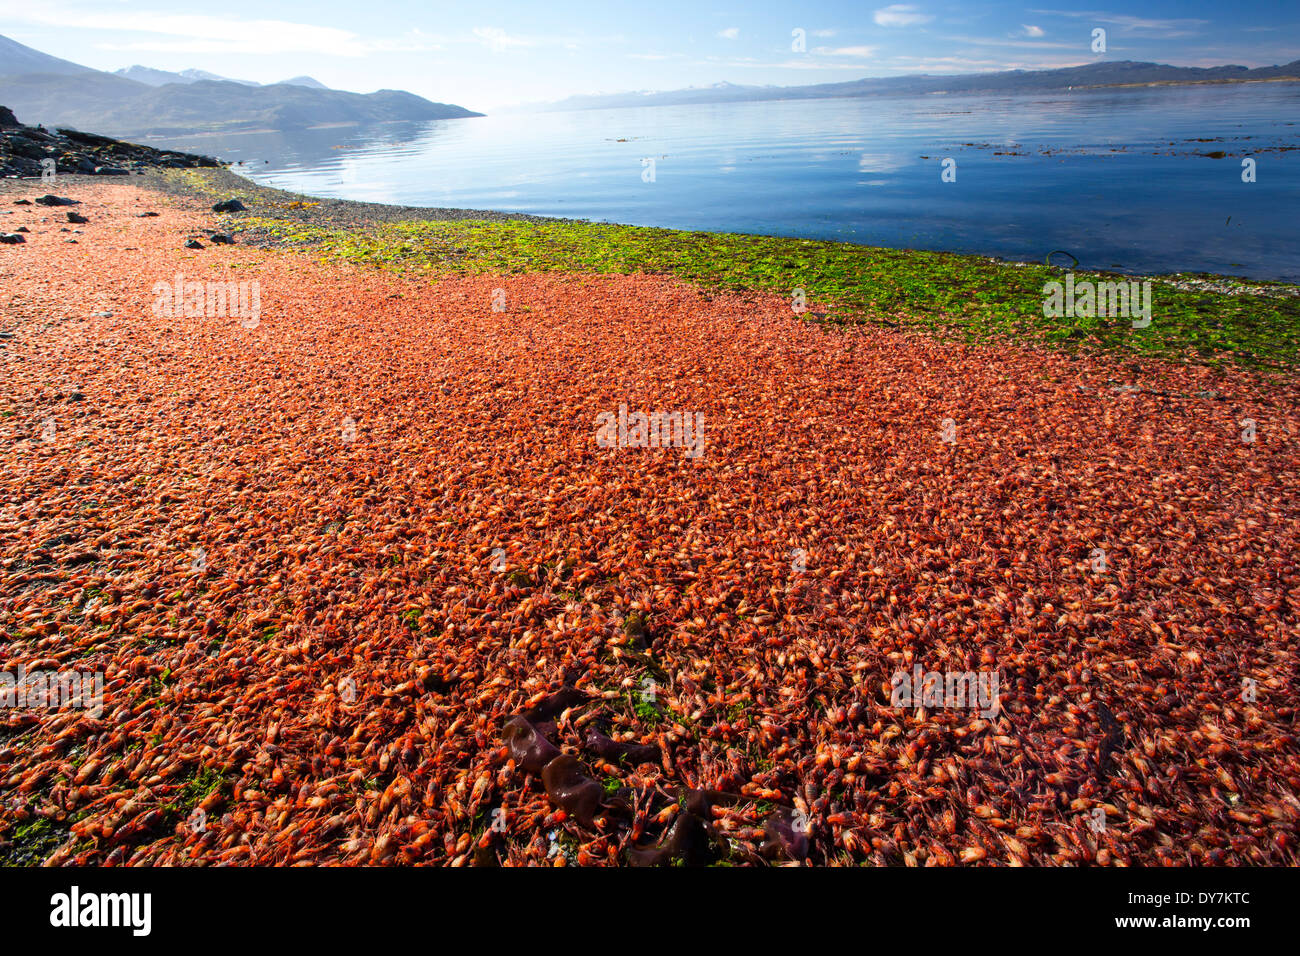 Subantarctic Squat Lobsters washed up on a beach in Ushuaia in Argentina. Stock Photo